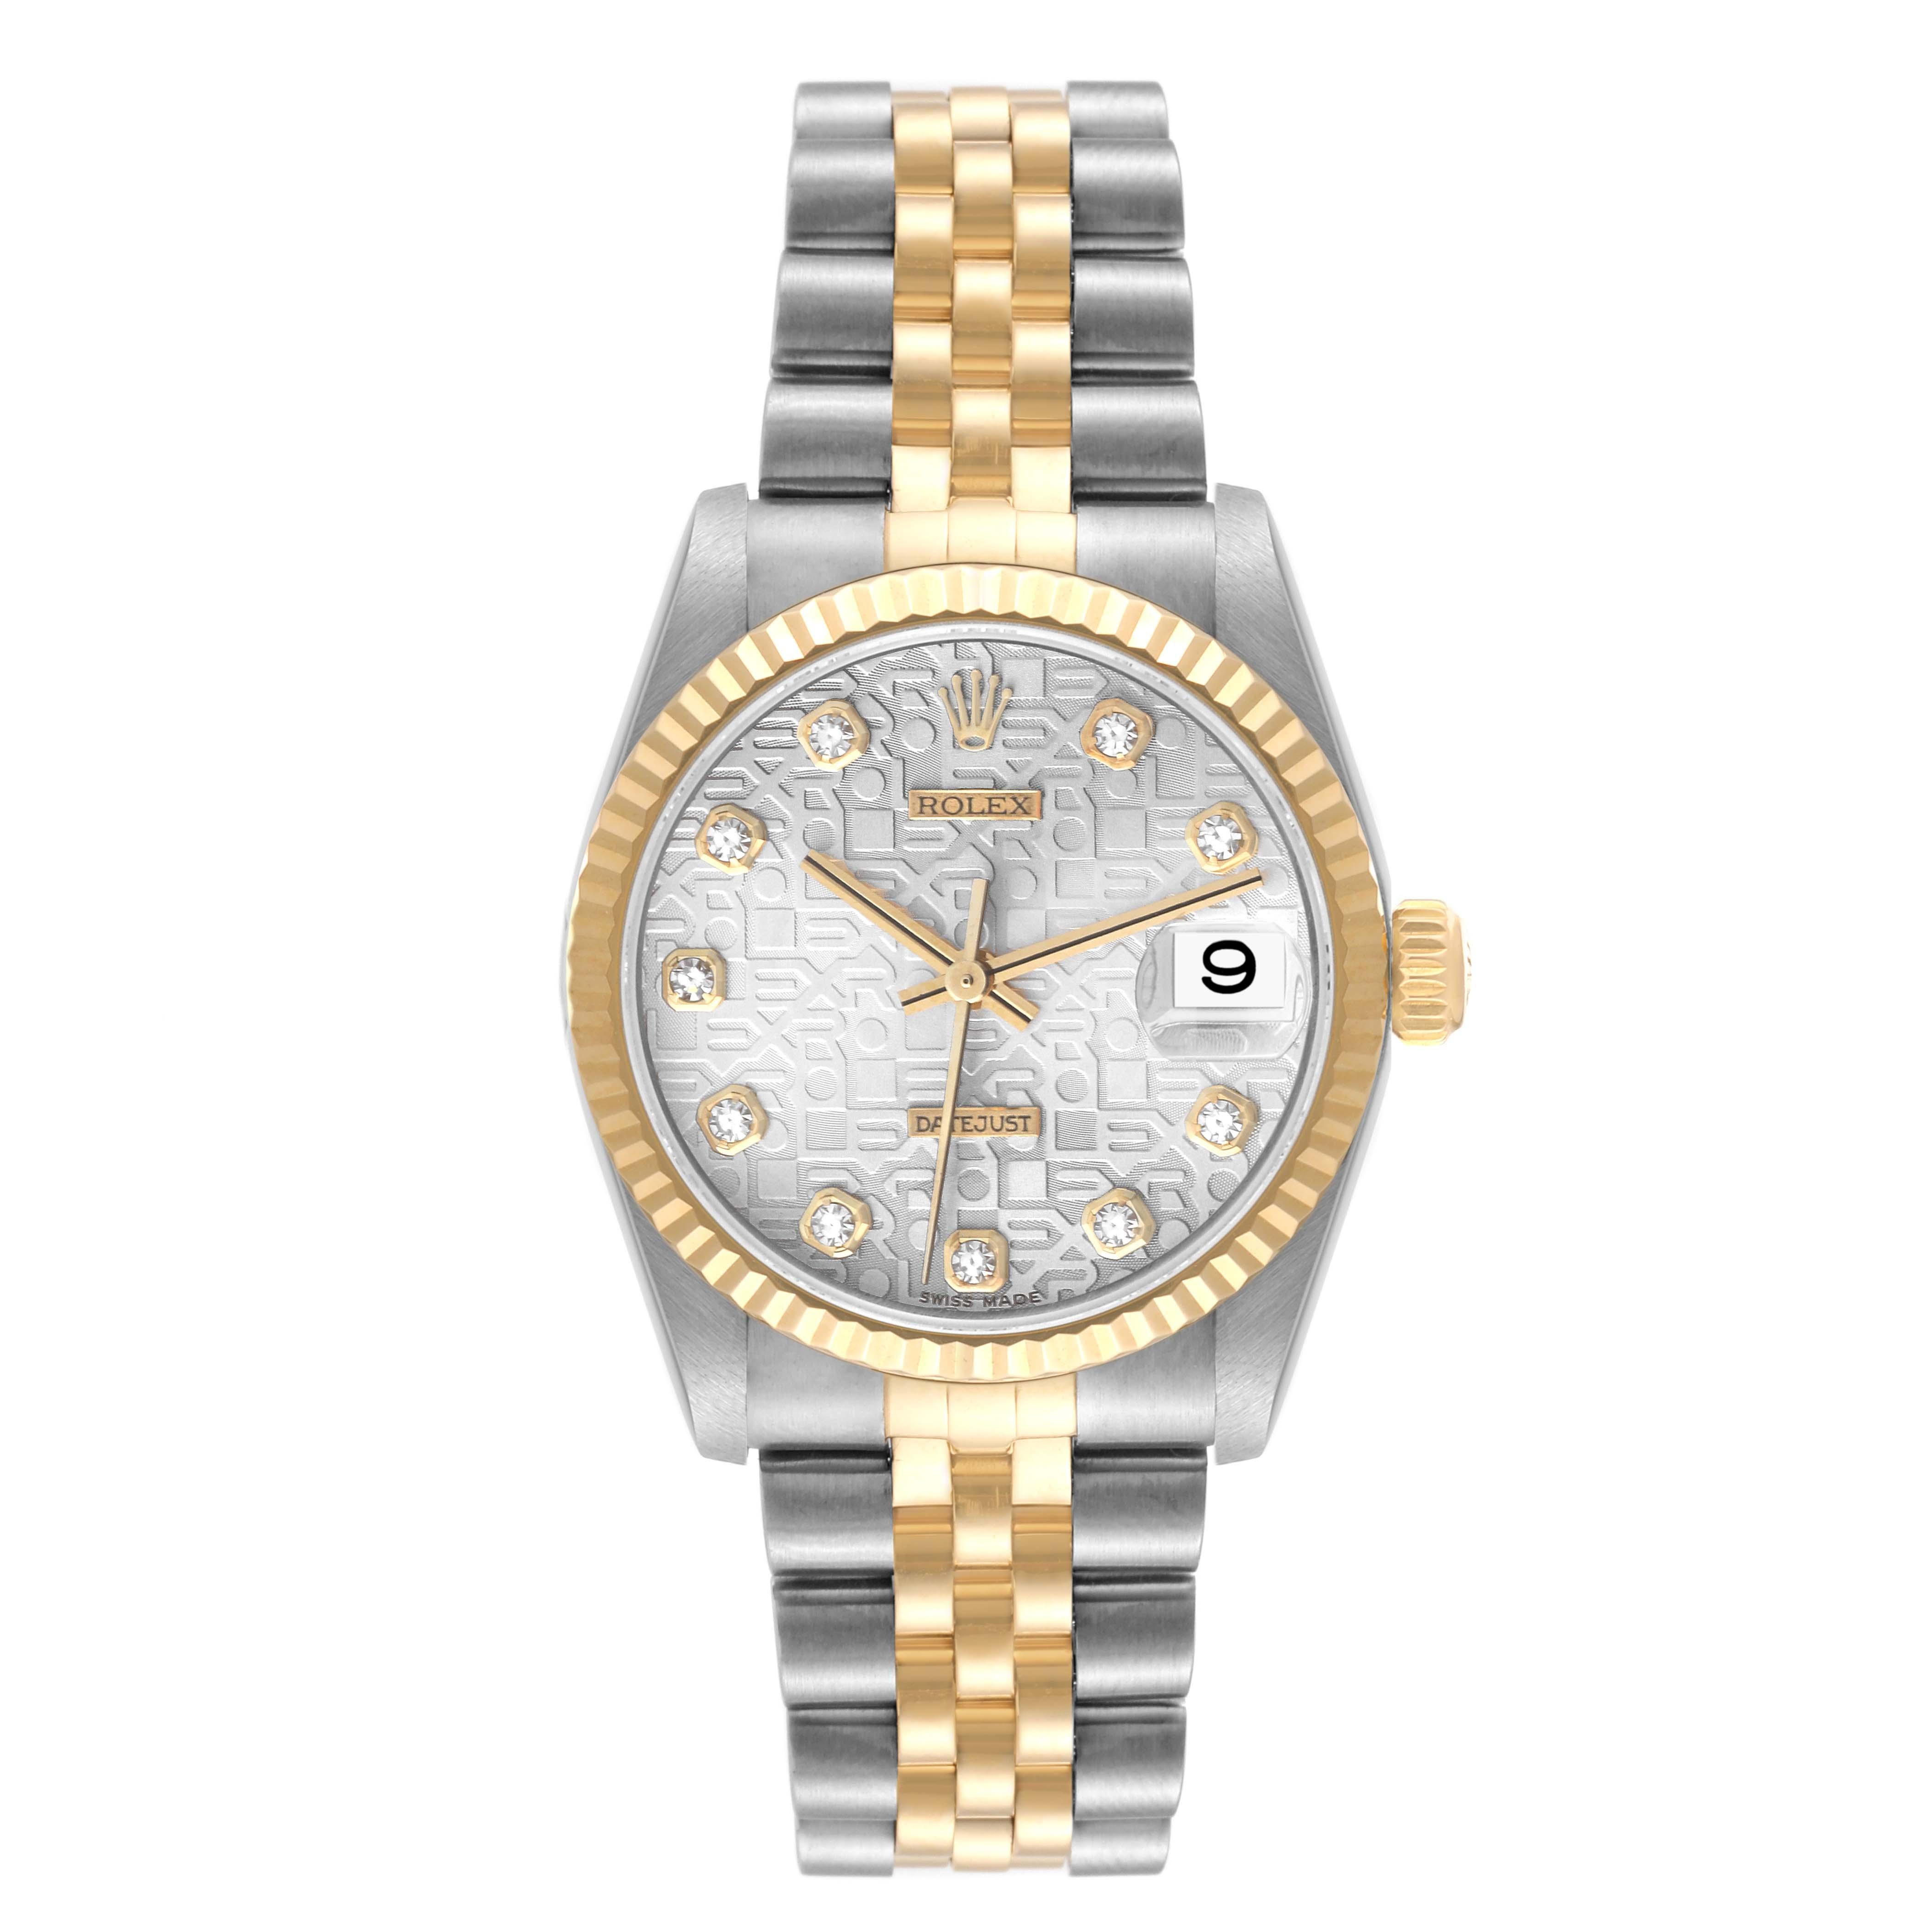 Rolex Datejust Midsize Steel Yellow Gold Diamond Ladies Watch 78273. Officially certified chronometer self-winding movement. Stainless steel oyster case 31 mm in diameter. Rolex logo on a 18K yellow gold crown. 18k yellow gold fluted bezel. Scratch